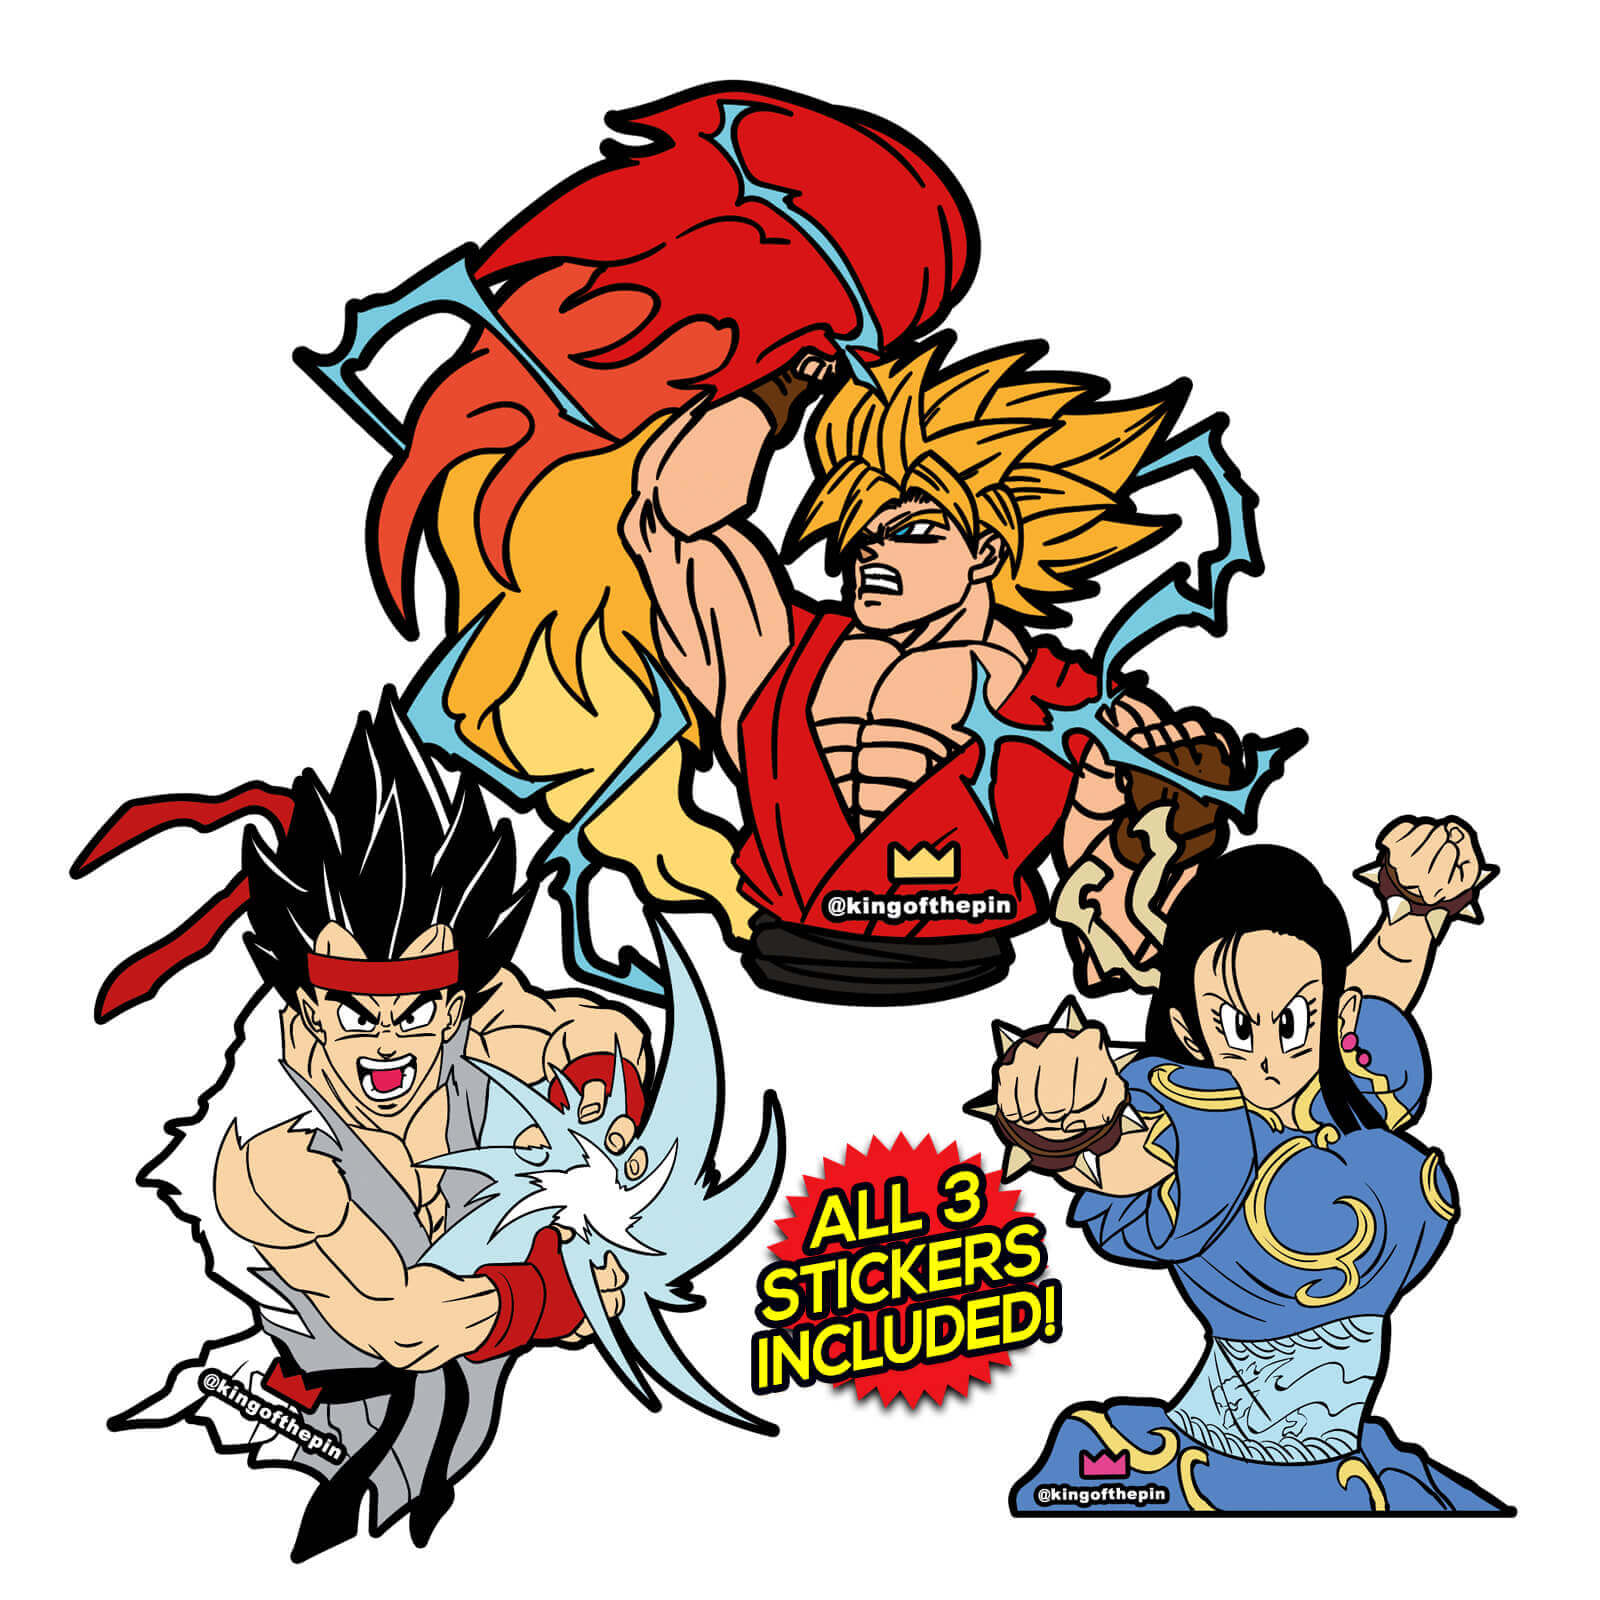  Street Fighter  Z Sticker  Pack includes All 3 Stickers  